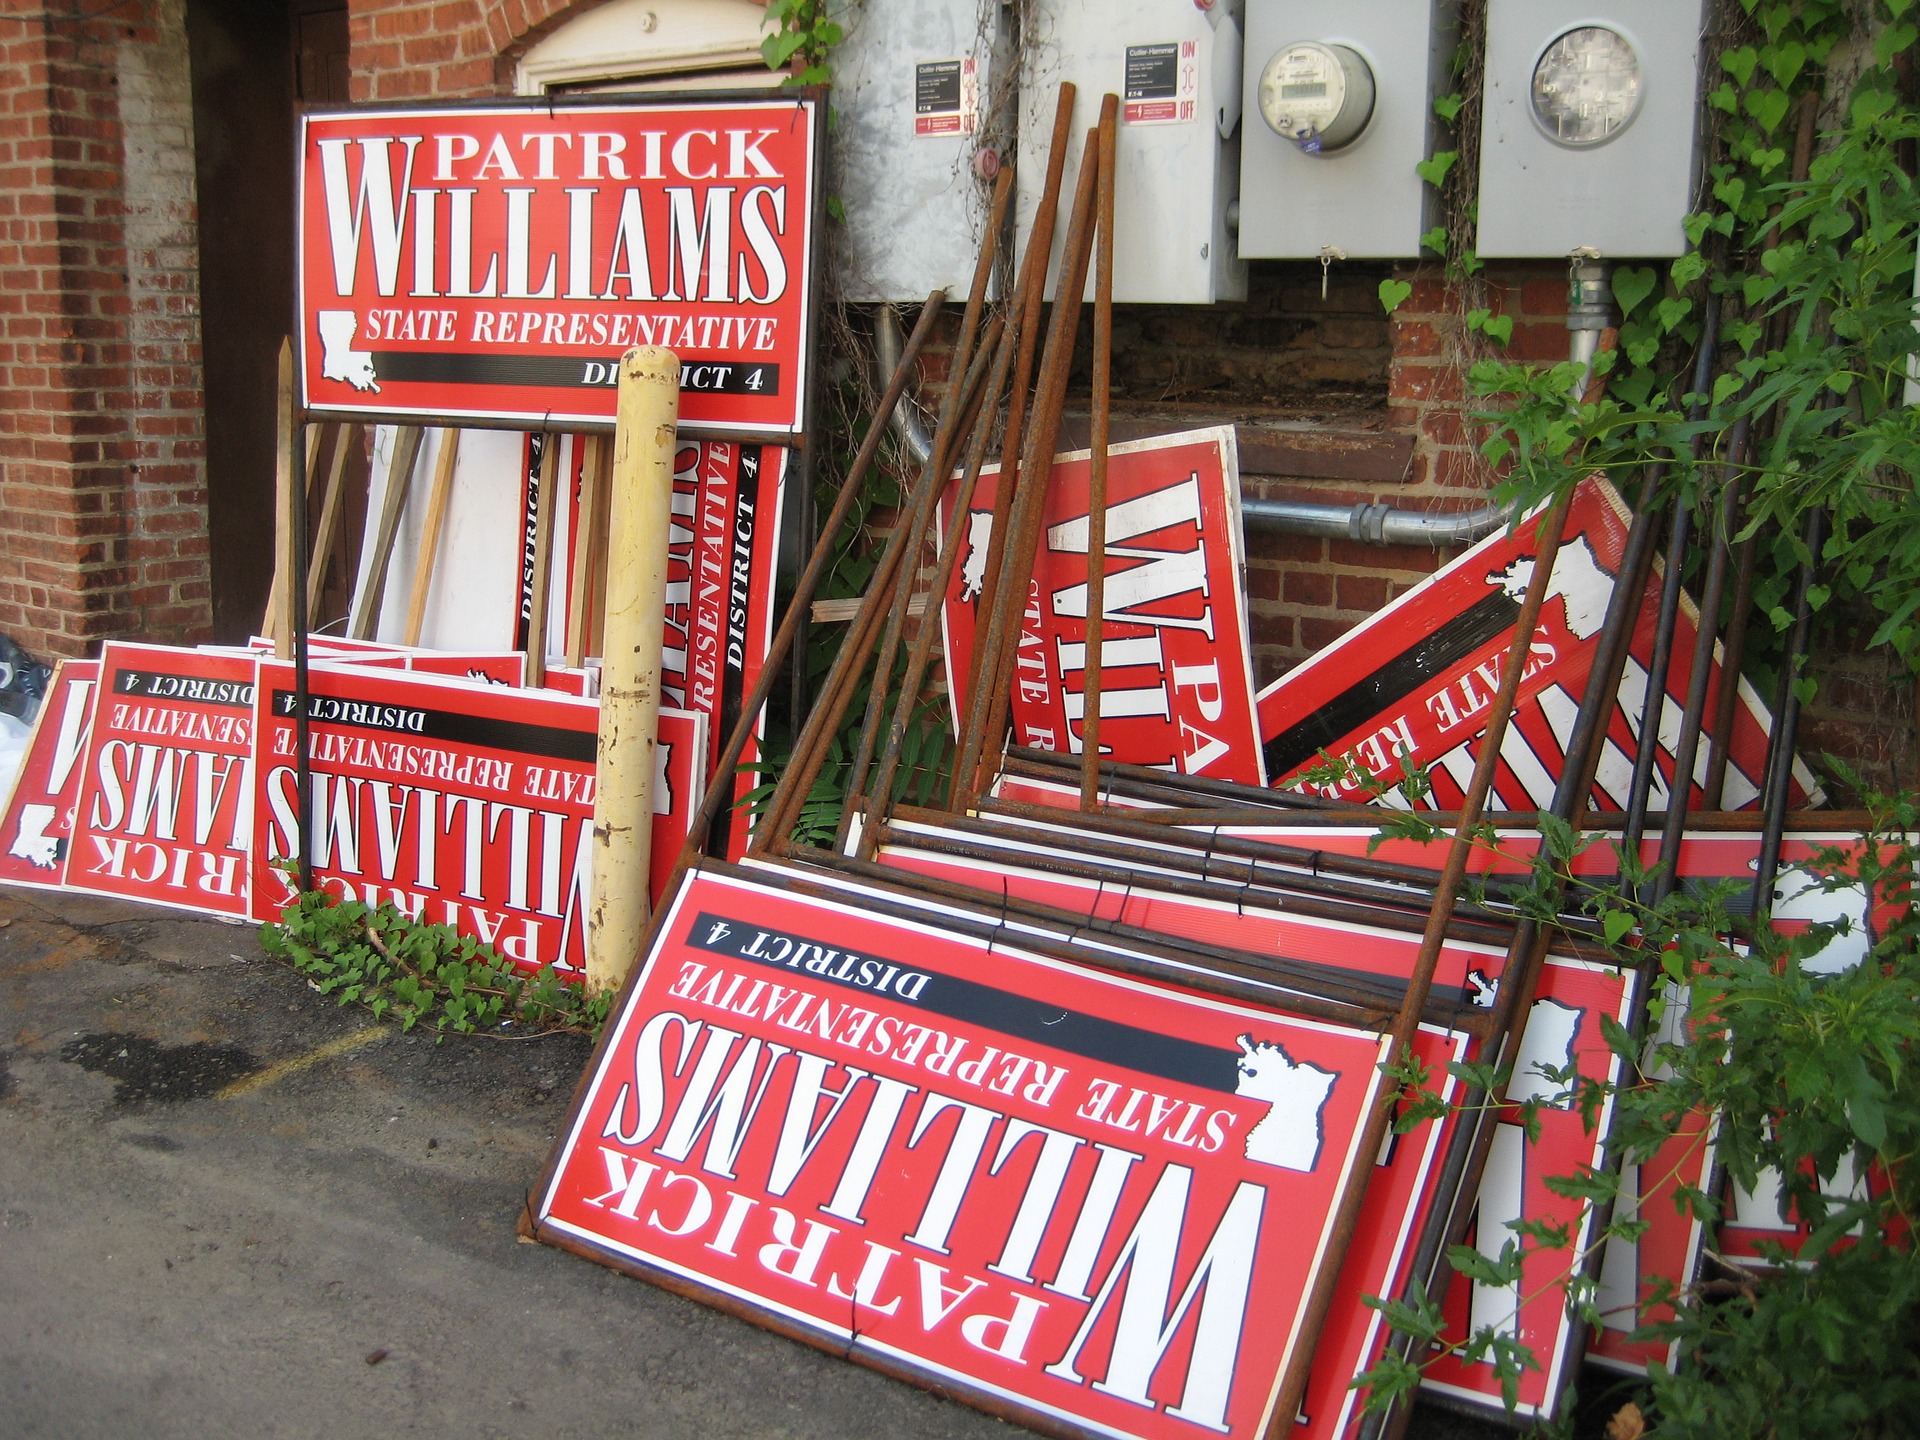 County: You can drop off campaign signs for recycling following election